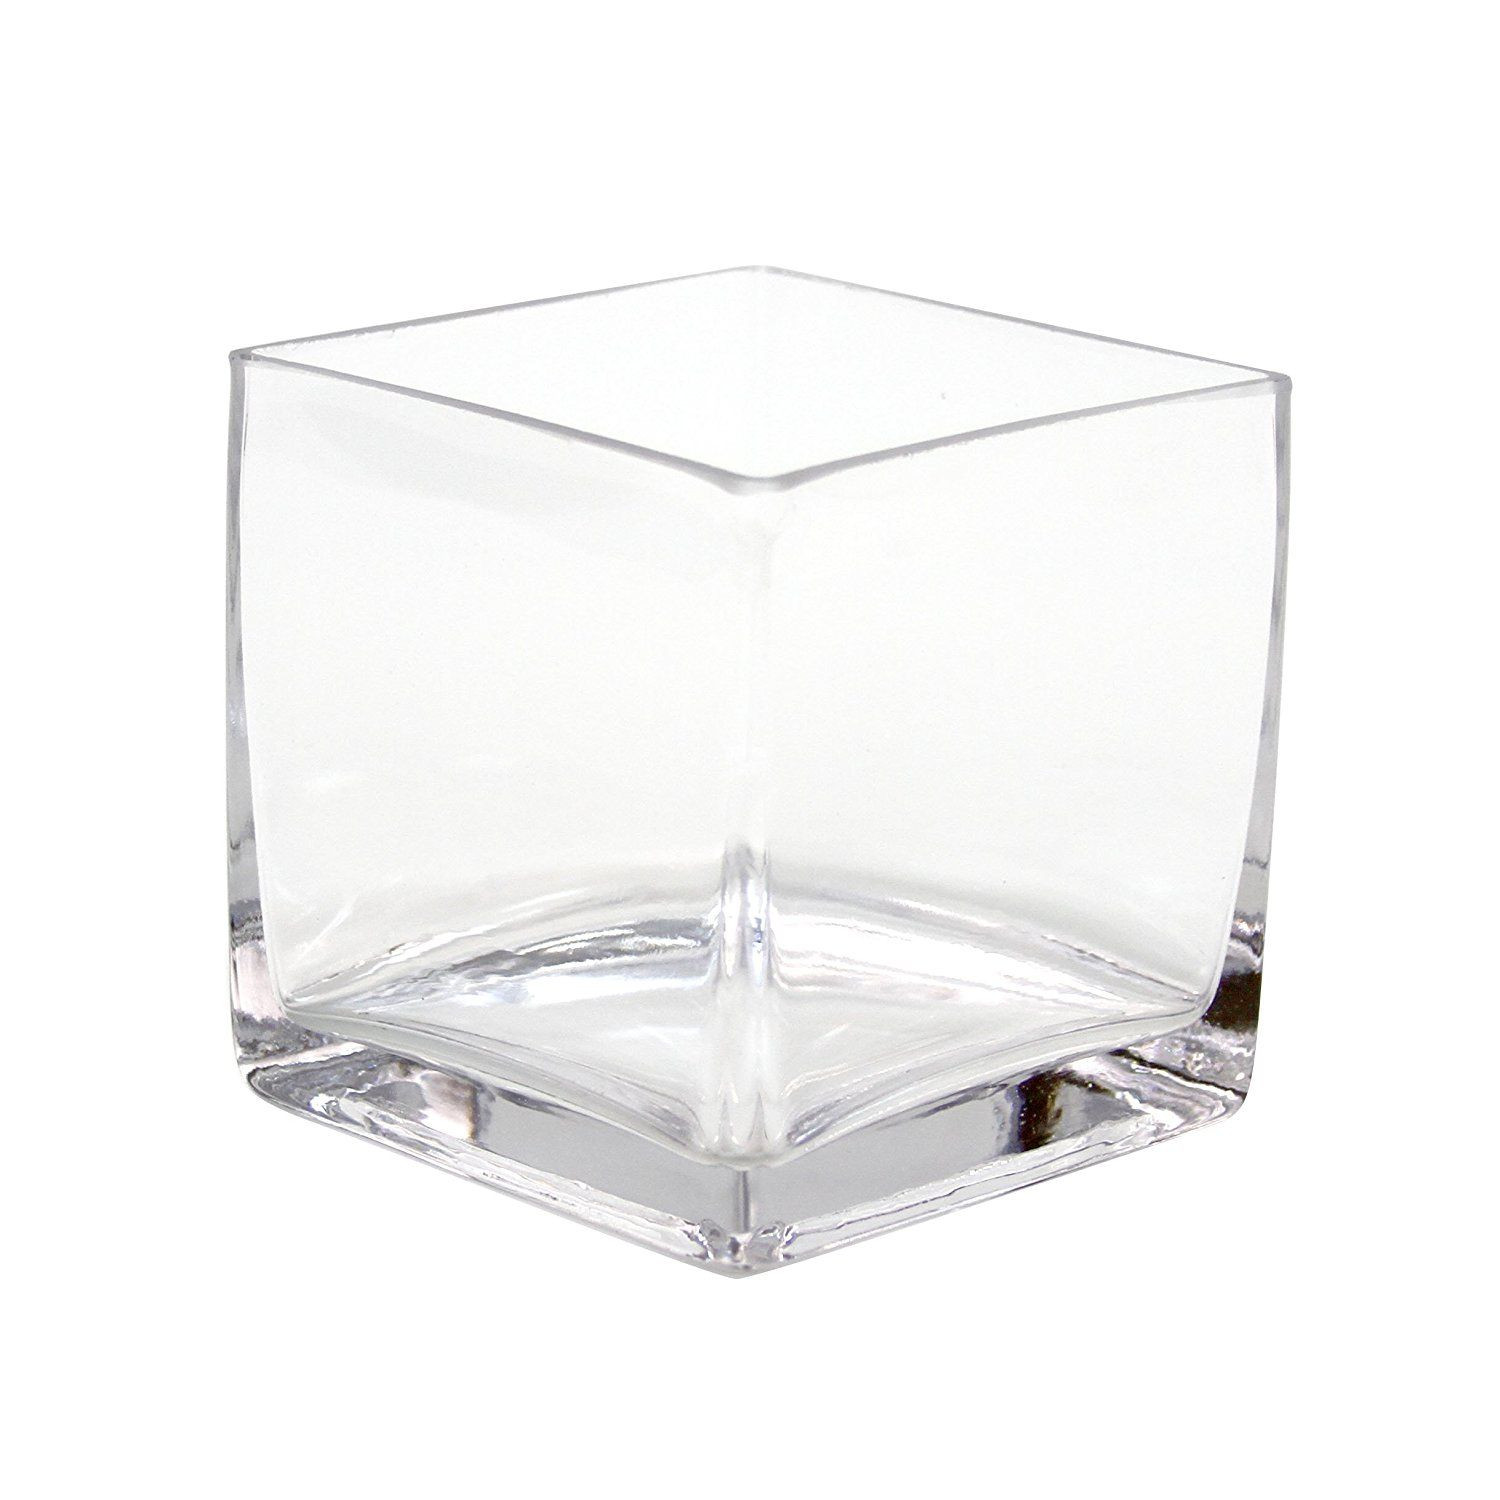 10 Lovable Amazon Clear Glass Vases 2024 free download amazon clear glass vases of koyal wholesale 404343 12 pack cube square glass vases 4 by 4 by 4 with regard to glass